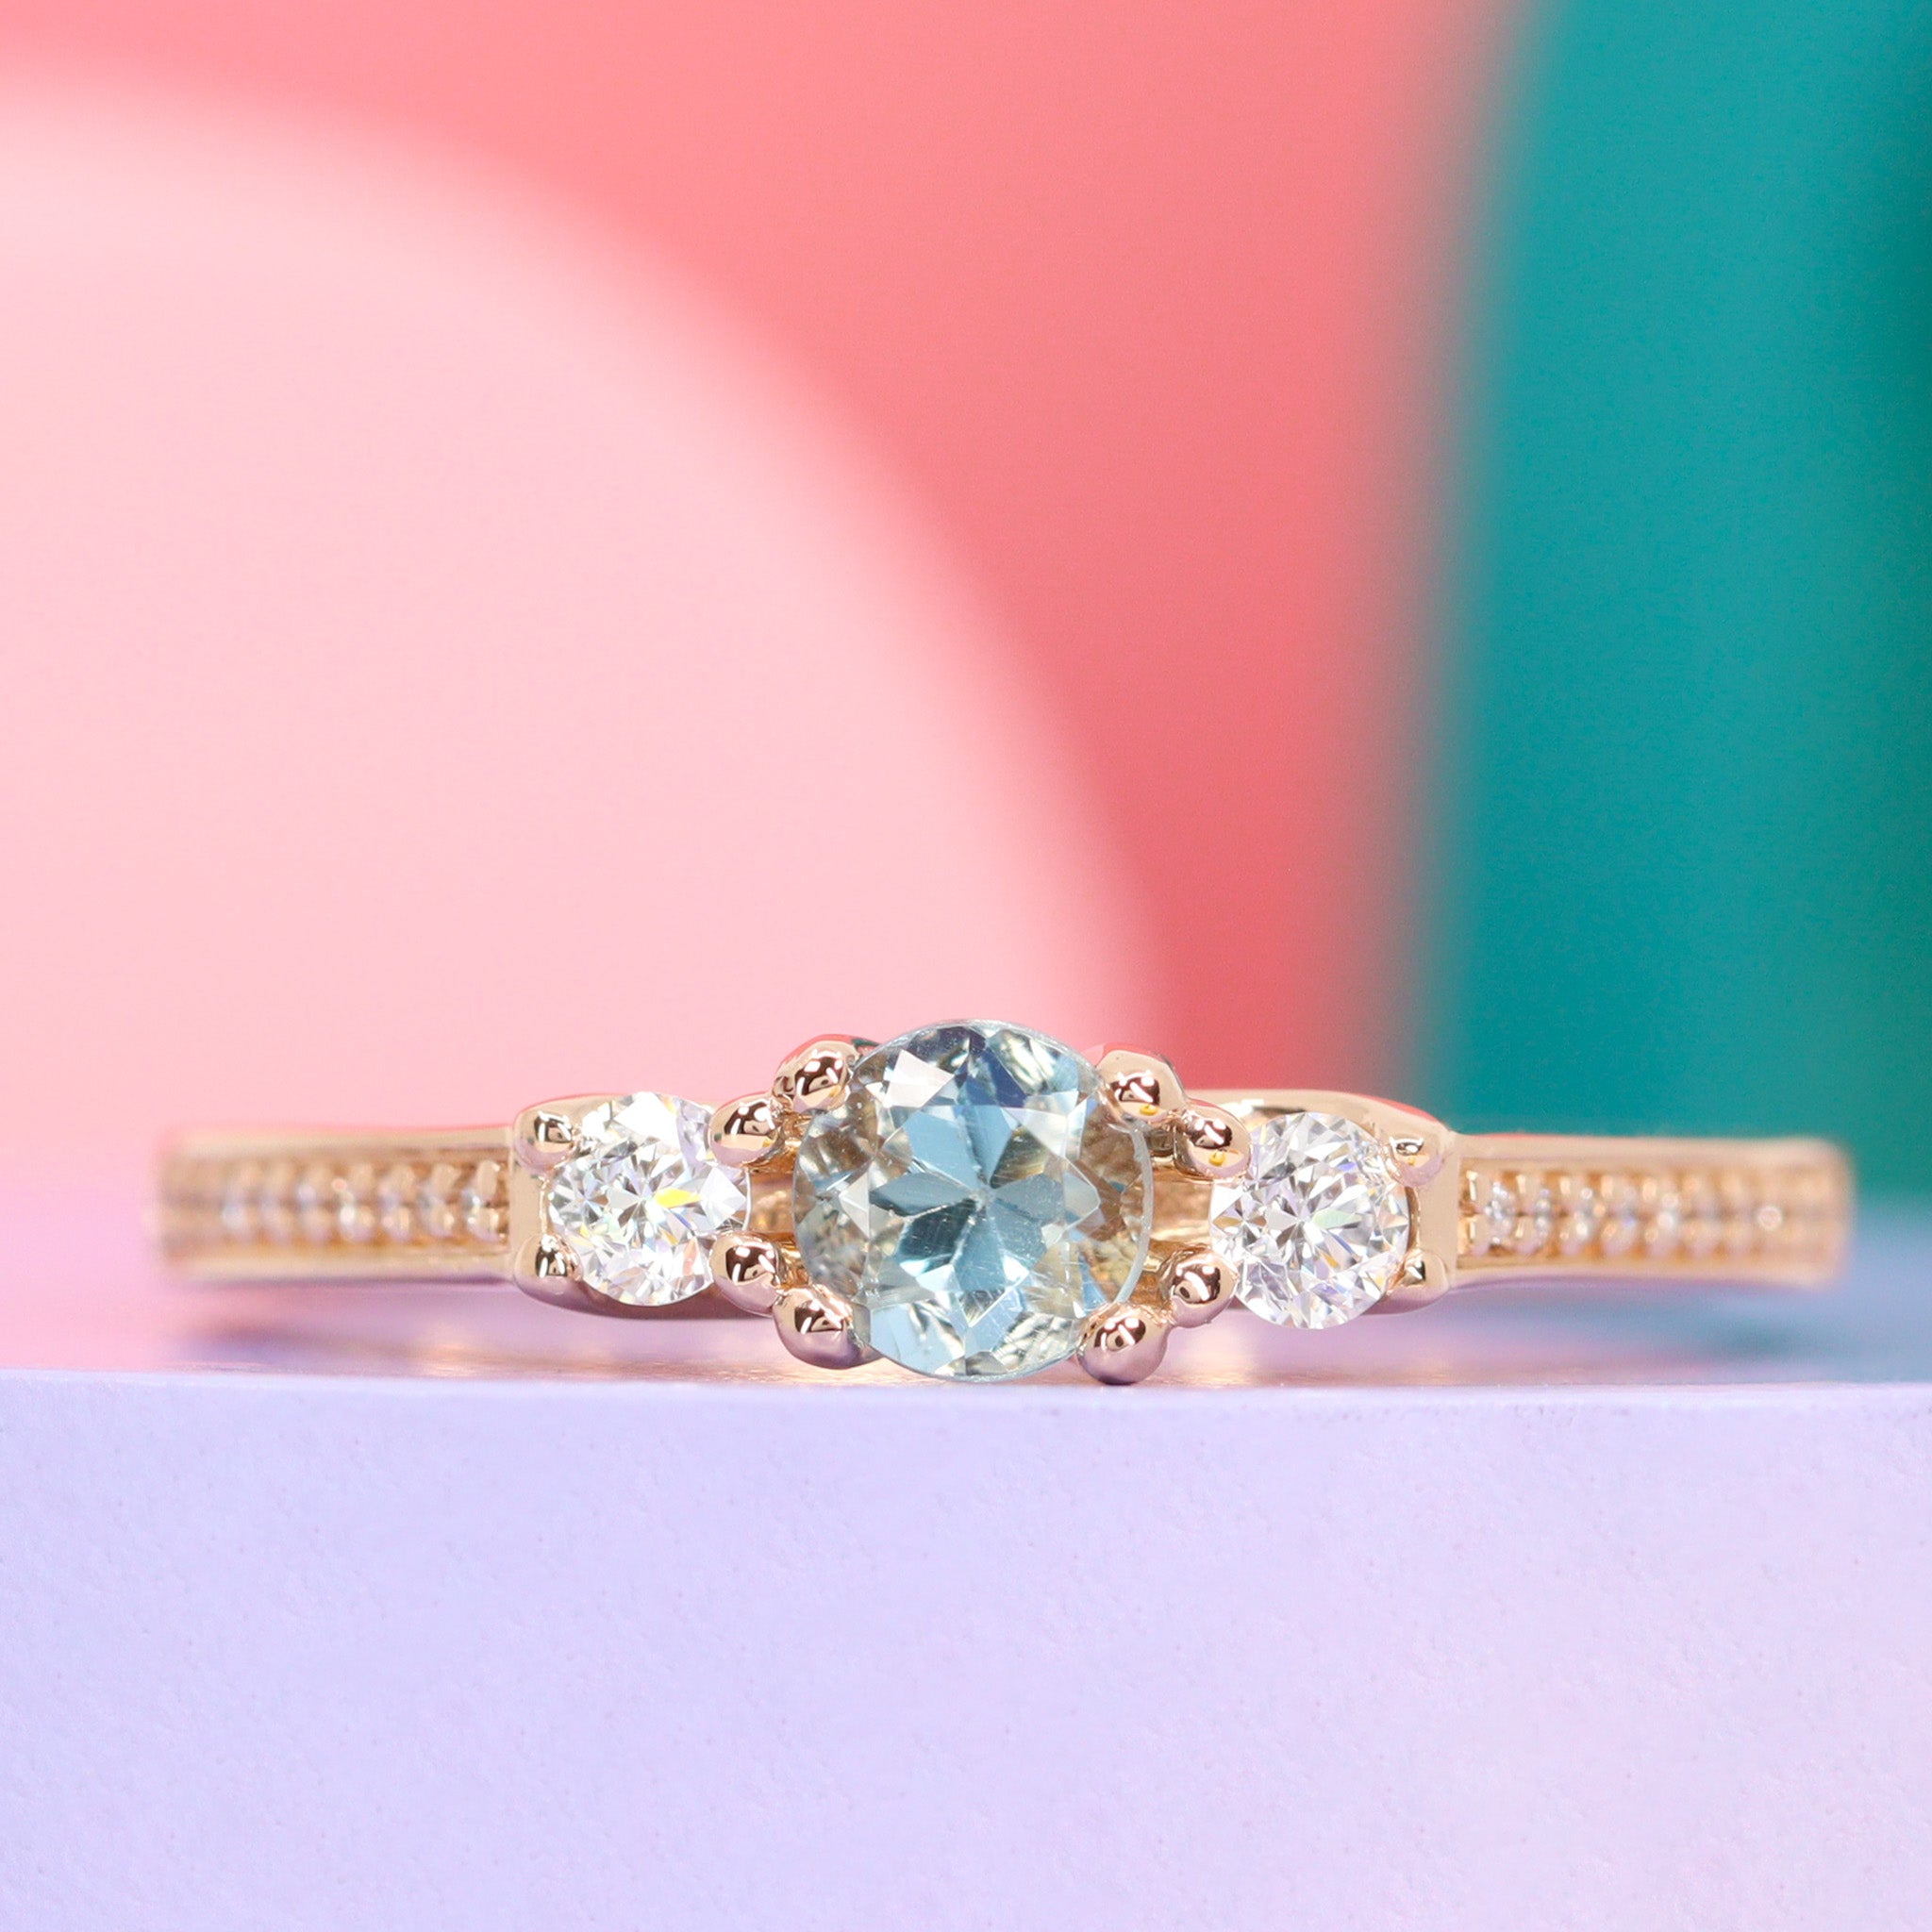 Premium AI Image | A sparkling halo diamond ring set in a delicate gold  band glistening in the light